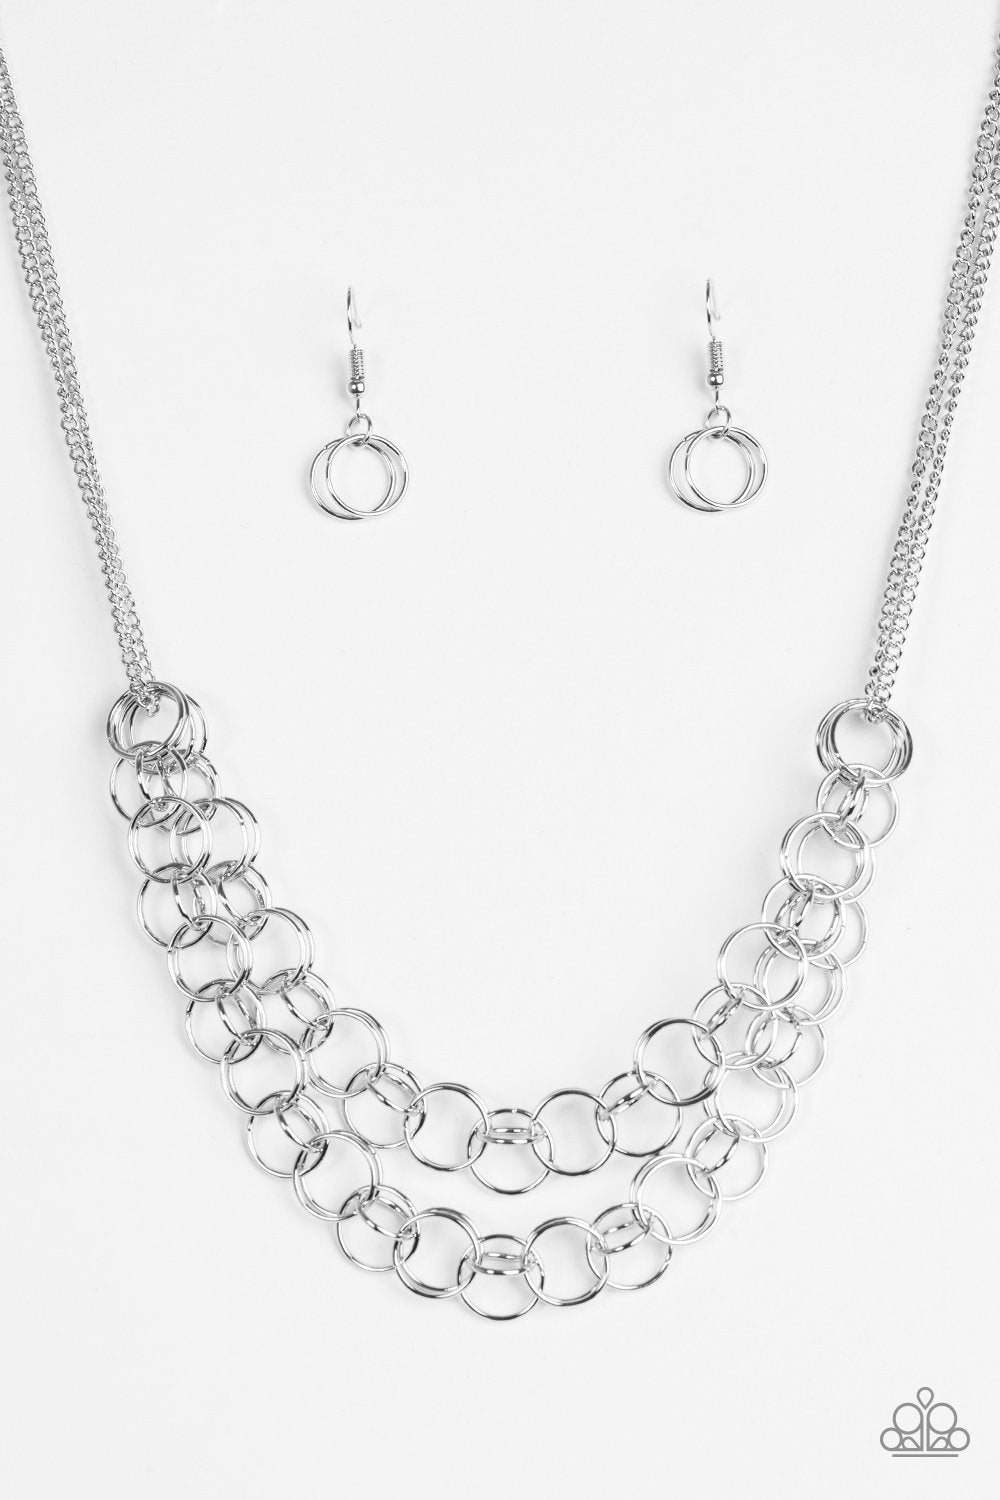 Circus Tent Tango Silver Necklace - Paparazzi Accessories-CarasShop.com - $5 Jewelry by Cara Jewels